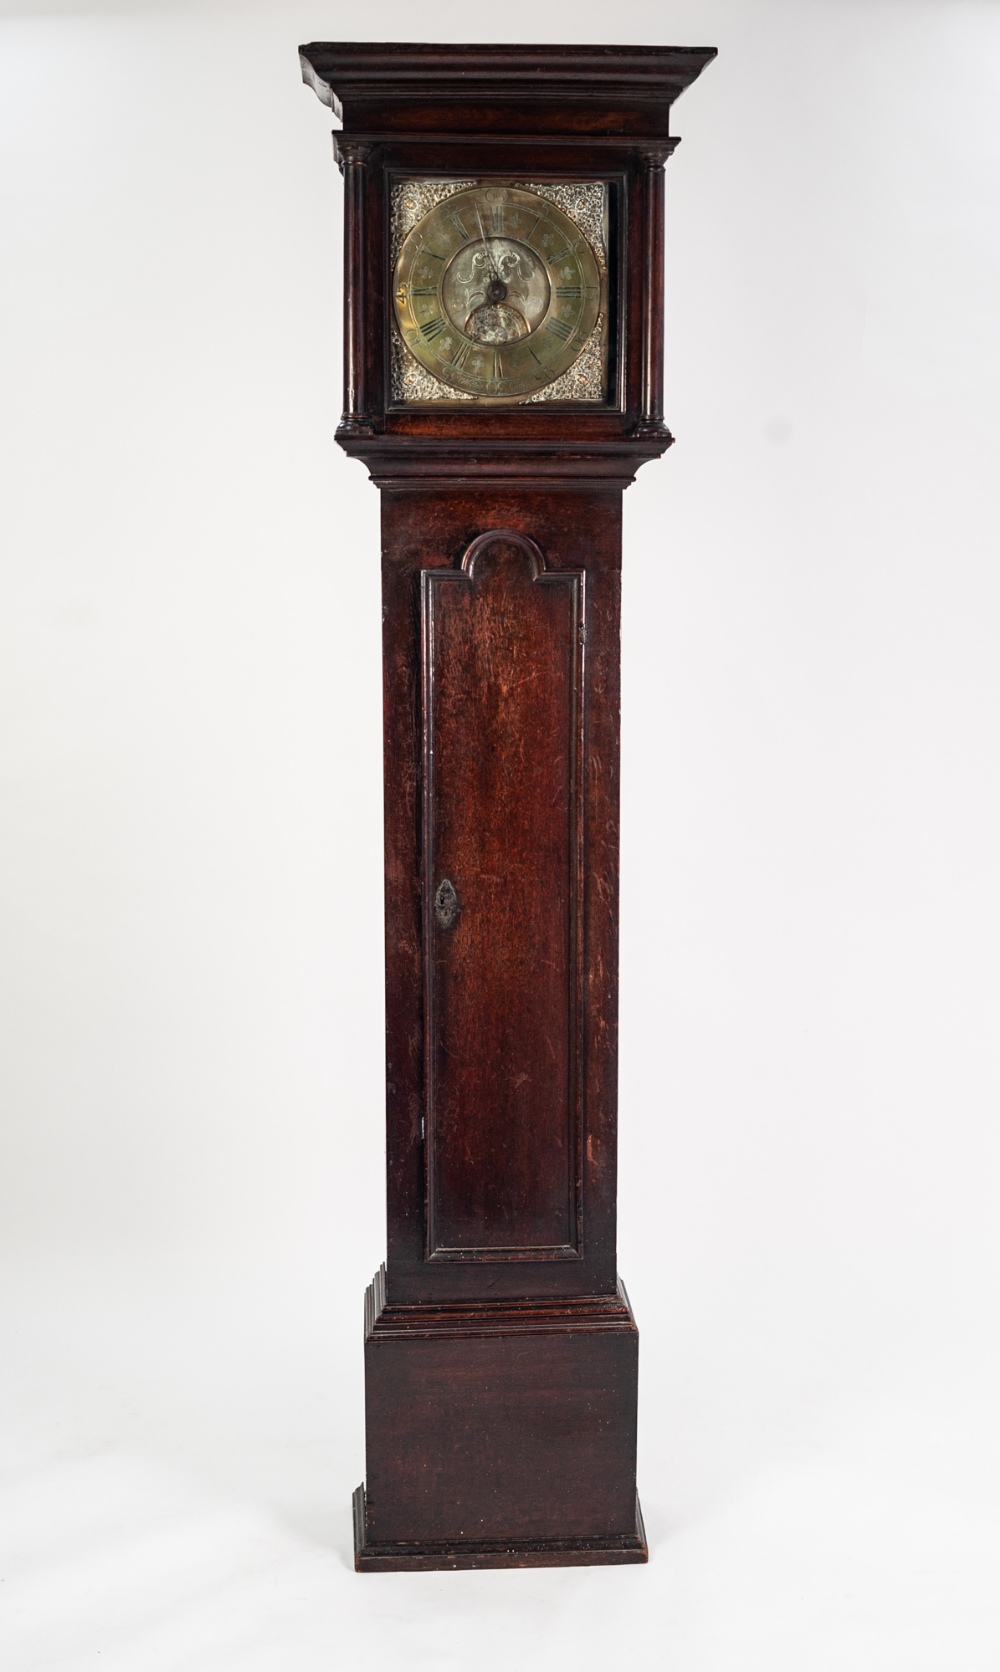 EIGHTEENTH CENTURY OAK LONGCASE CLOCK SIGNED WOLLEY CODNOR, the 11" brass dial with date aperture to